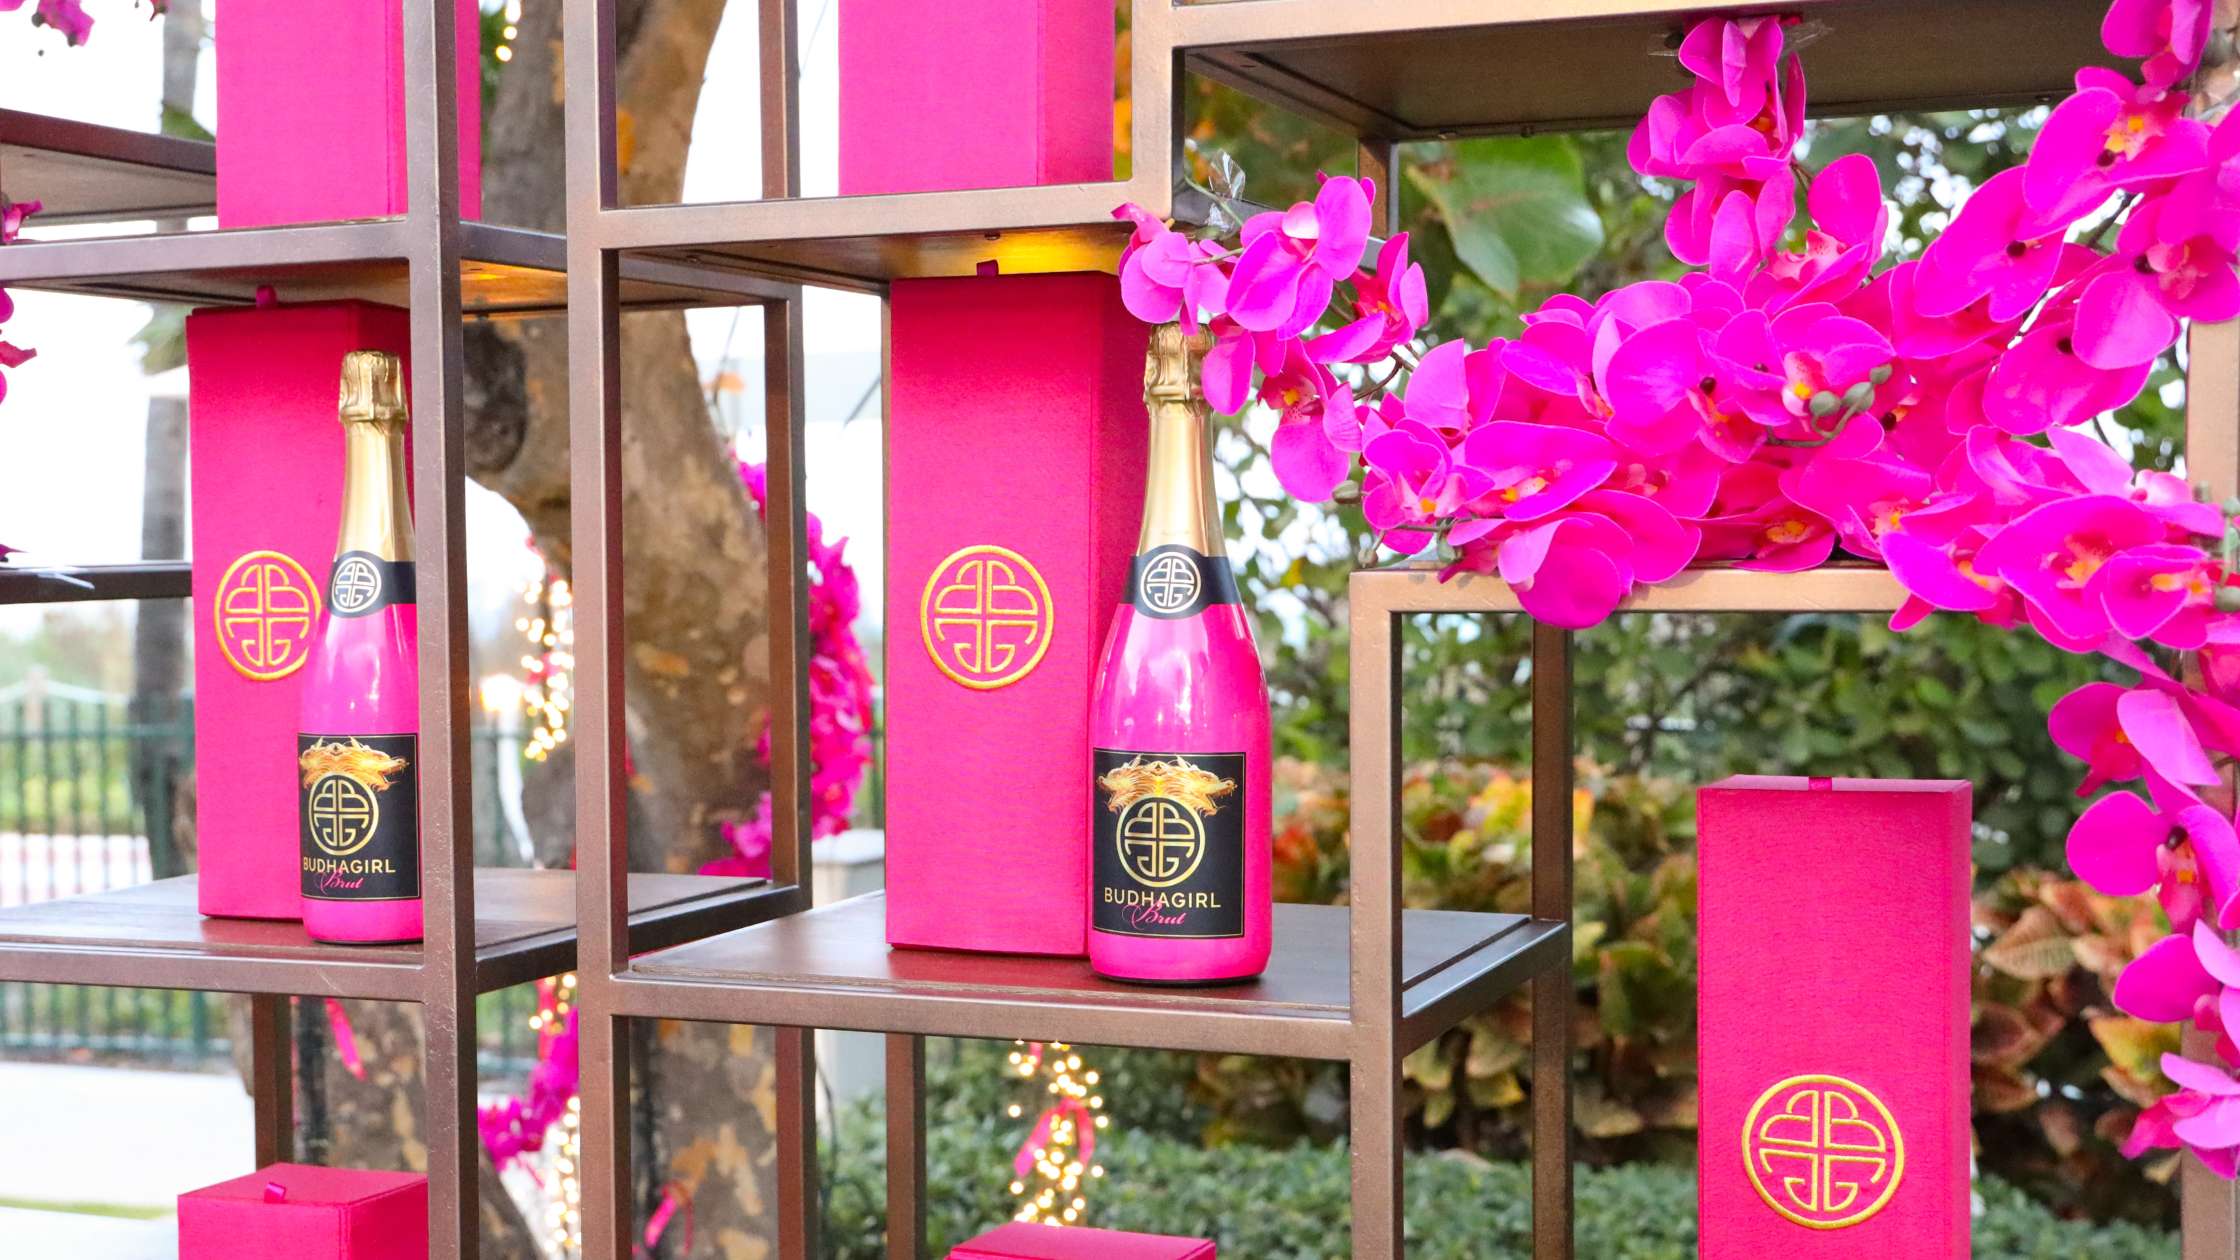 BuDhaGirl Sparkling Wines Bottles and Pink Silk Boxes on Display at Ocean Drive Magazine's Art of the Party During Art Basel Miami Beach | BuDhaGirl